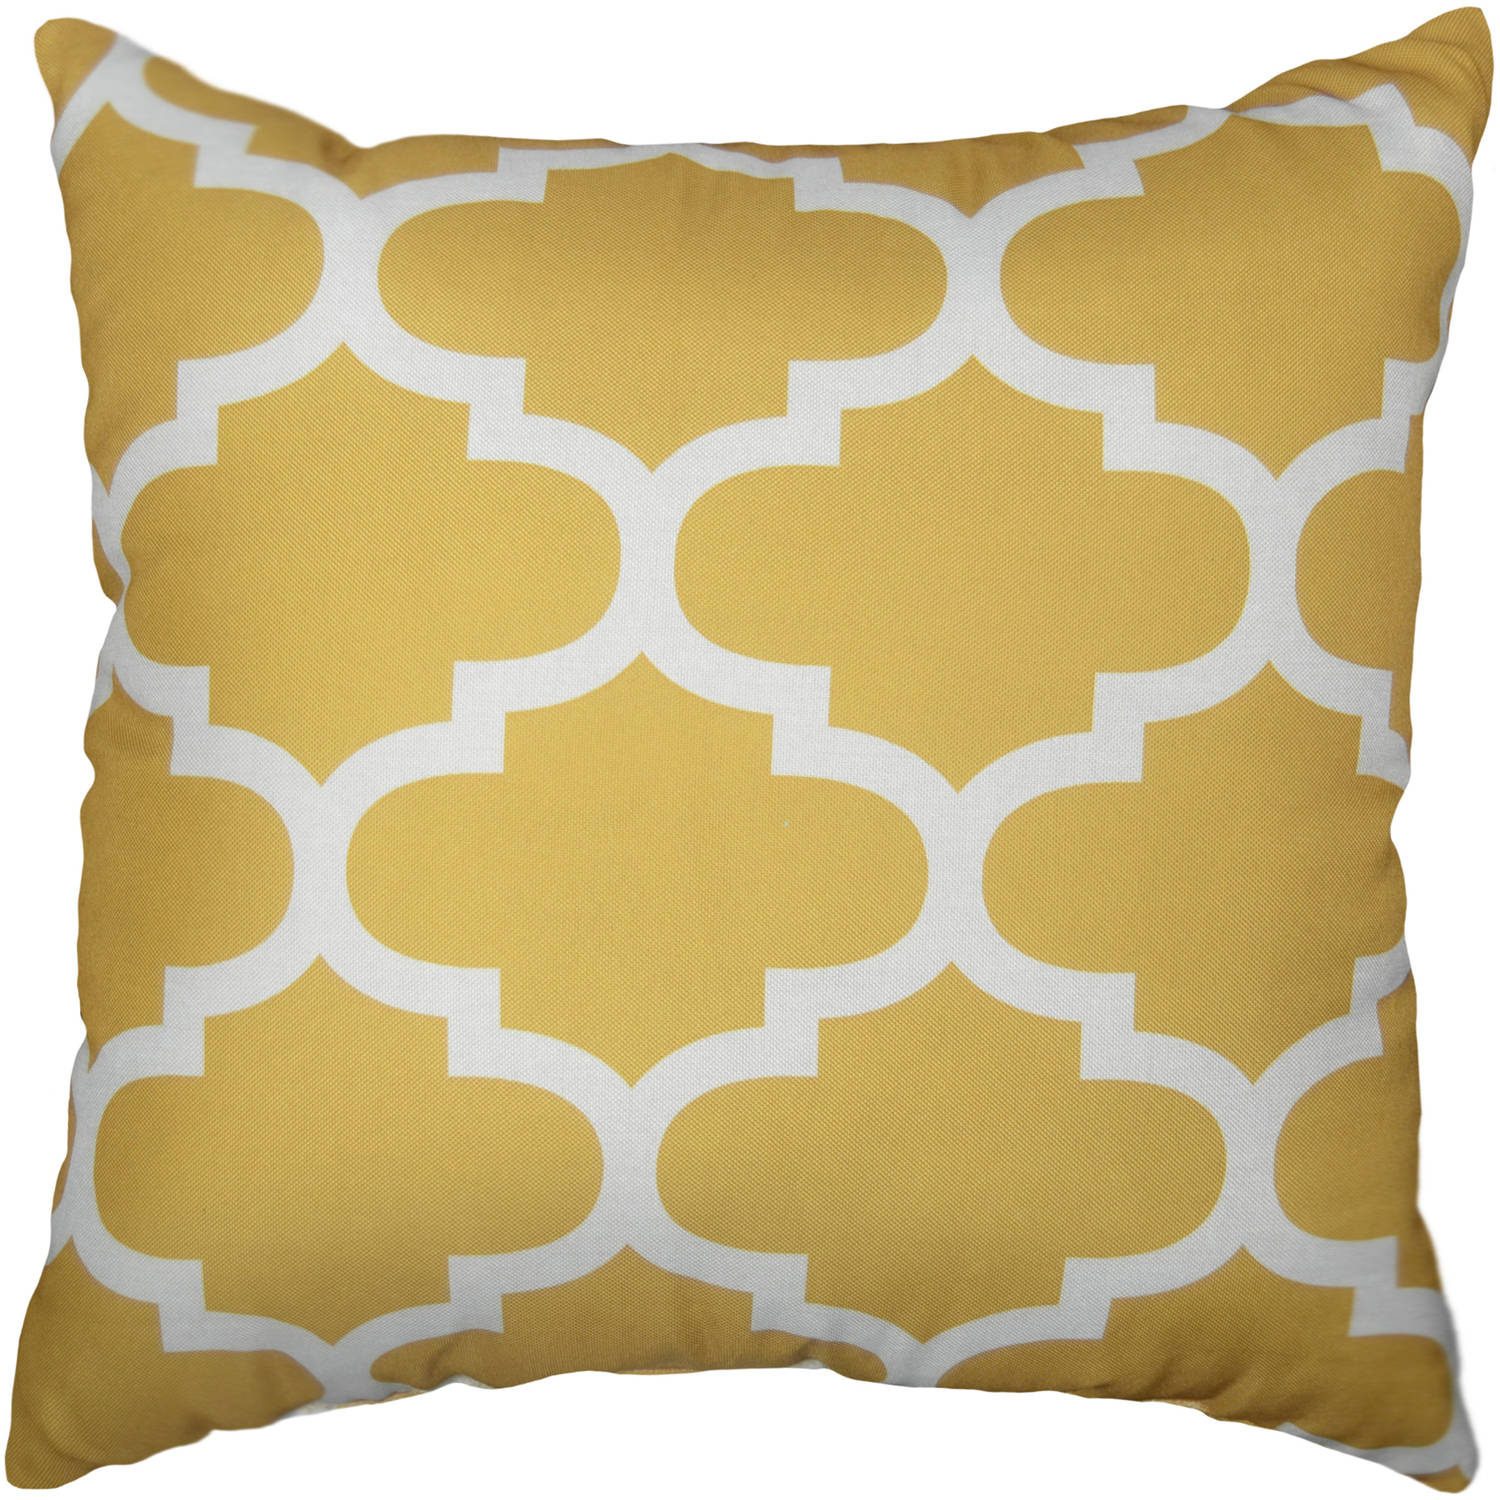 Mainstays Fretwork Square Decorative Pillow, 18" x 18", Gold, 1PC - image 1 of 2